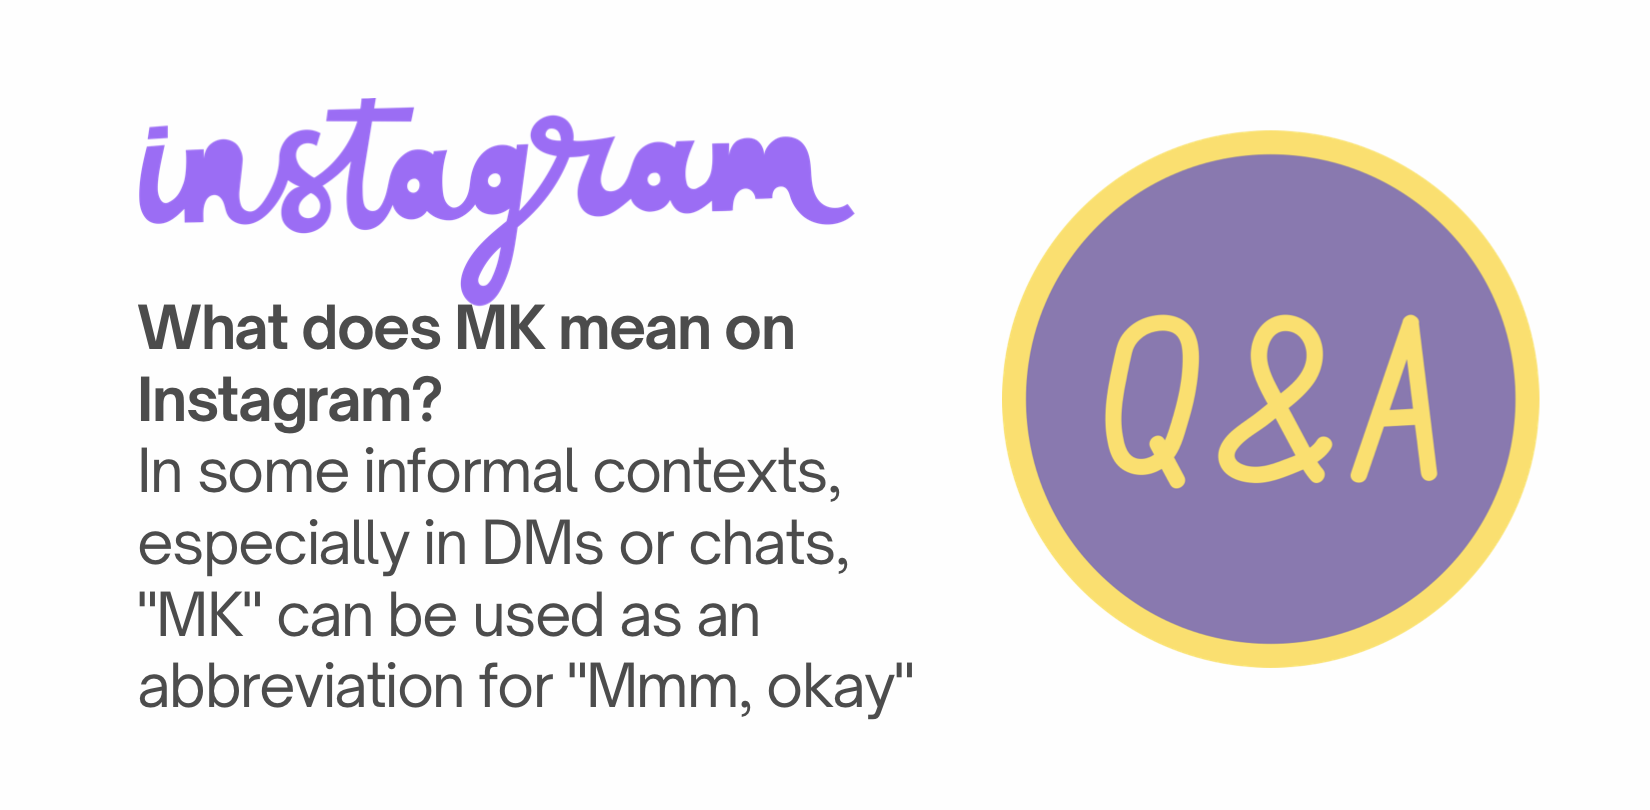 What does MK mean on Instagram?